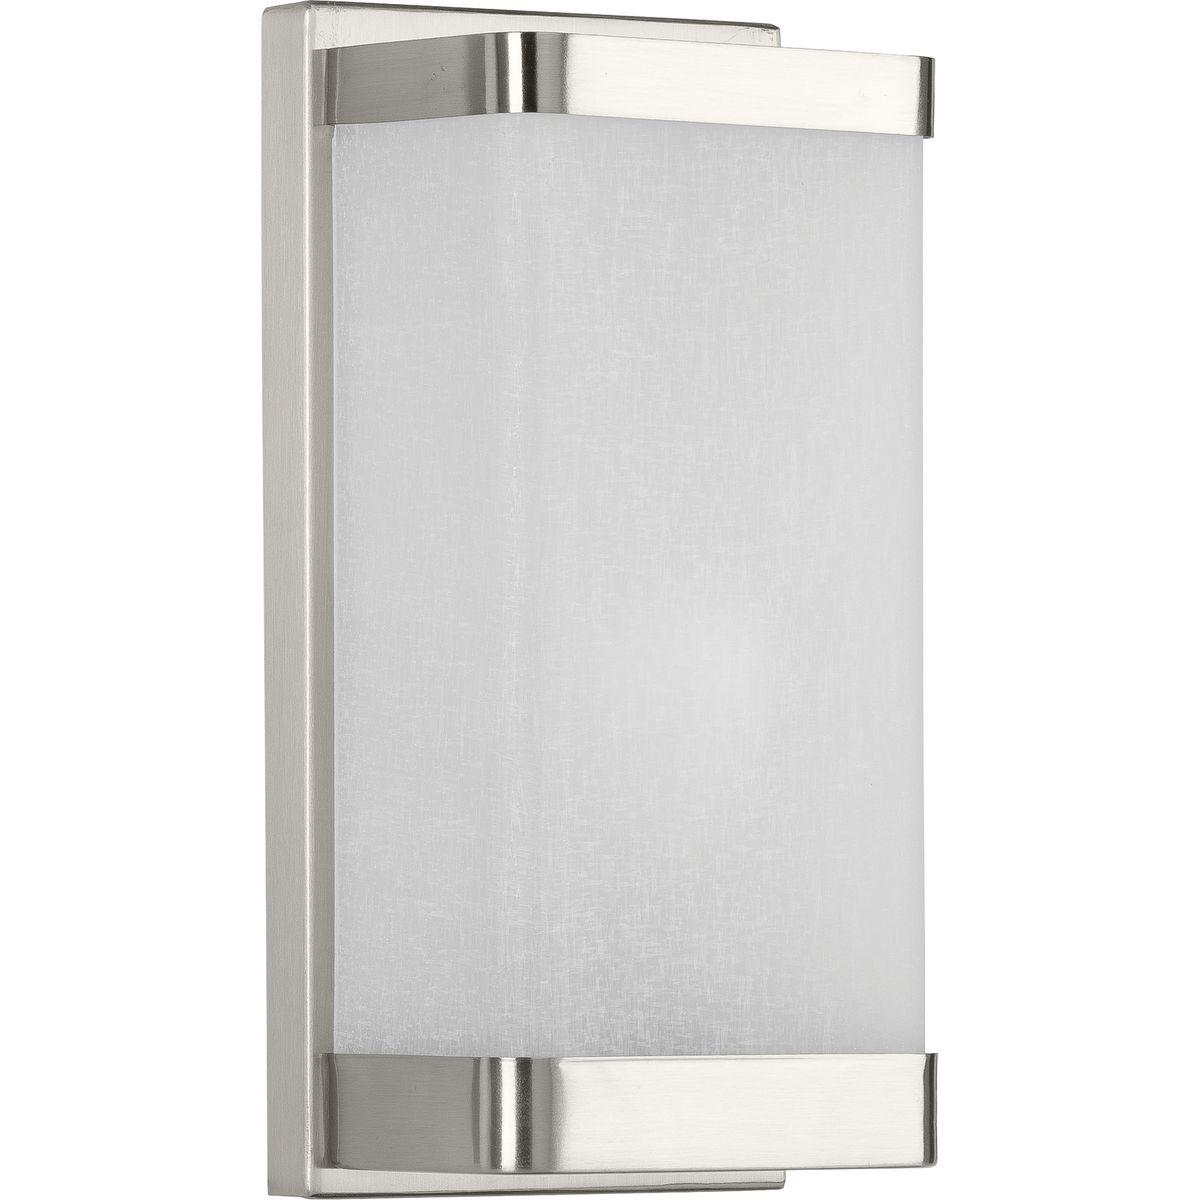 Hubbell P710072-009 With its stylish simplicity, the Linen Glass Sconce is a fitting, classic choice for adding extra lighting to any transitional interior. A Brushed Nickel frame and metal bands hold a clean, etched glass shade in its place as it emits soft, comfortable lig